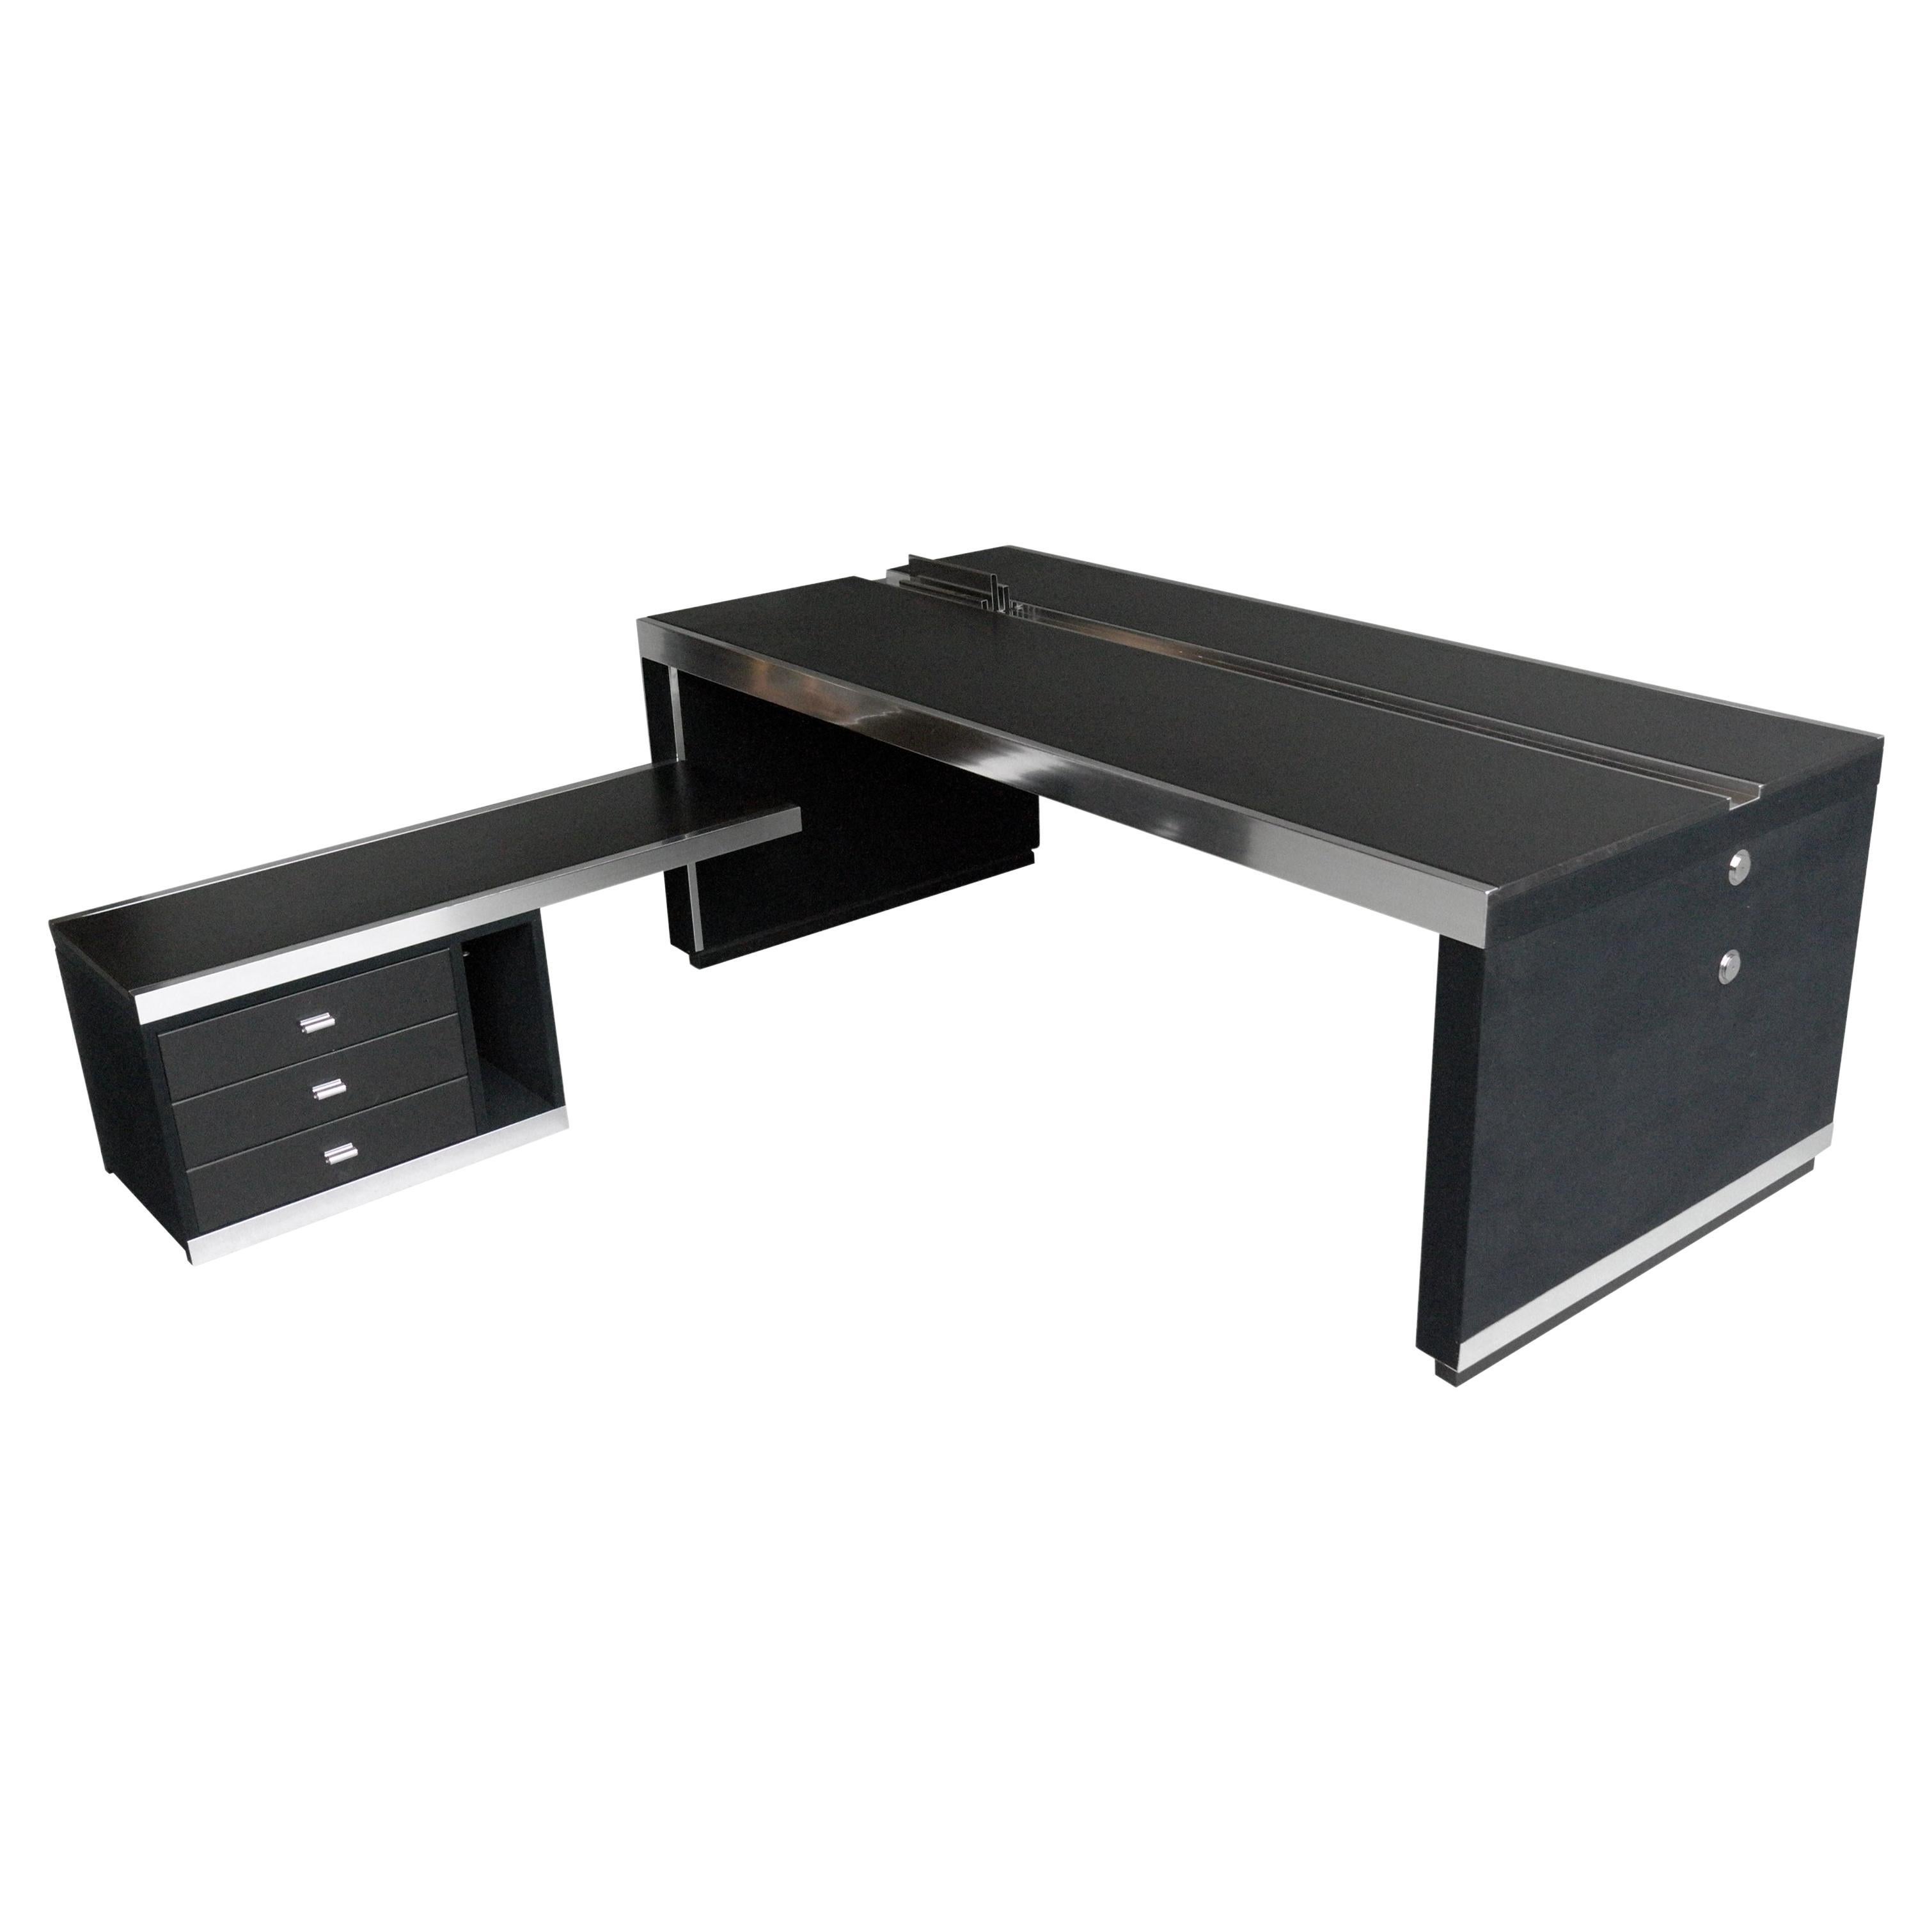 What is the best L shaped desk?